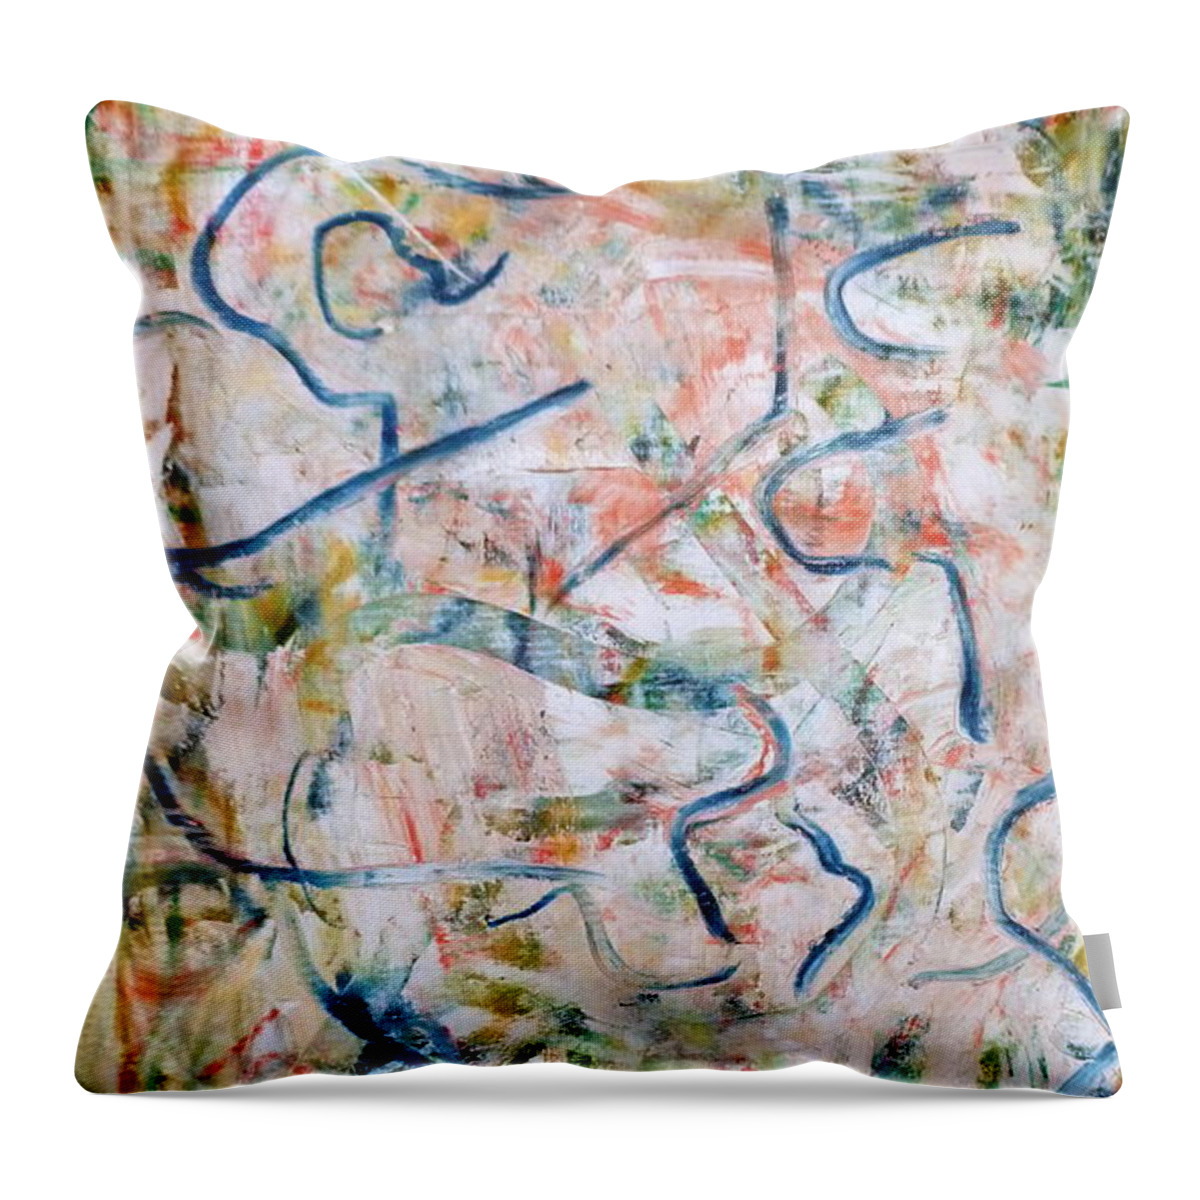  Throw Pillow featuring the painting Couple In Bed by JC Armbruster